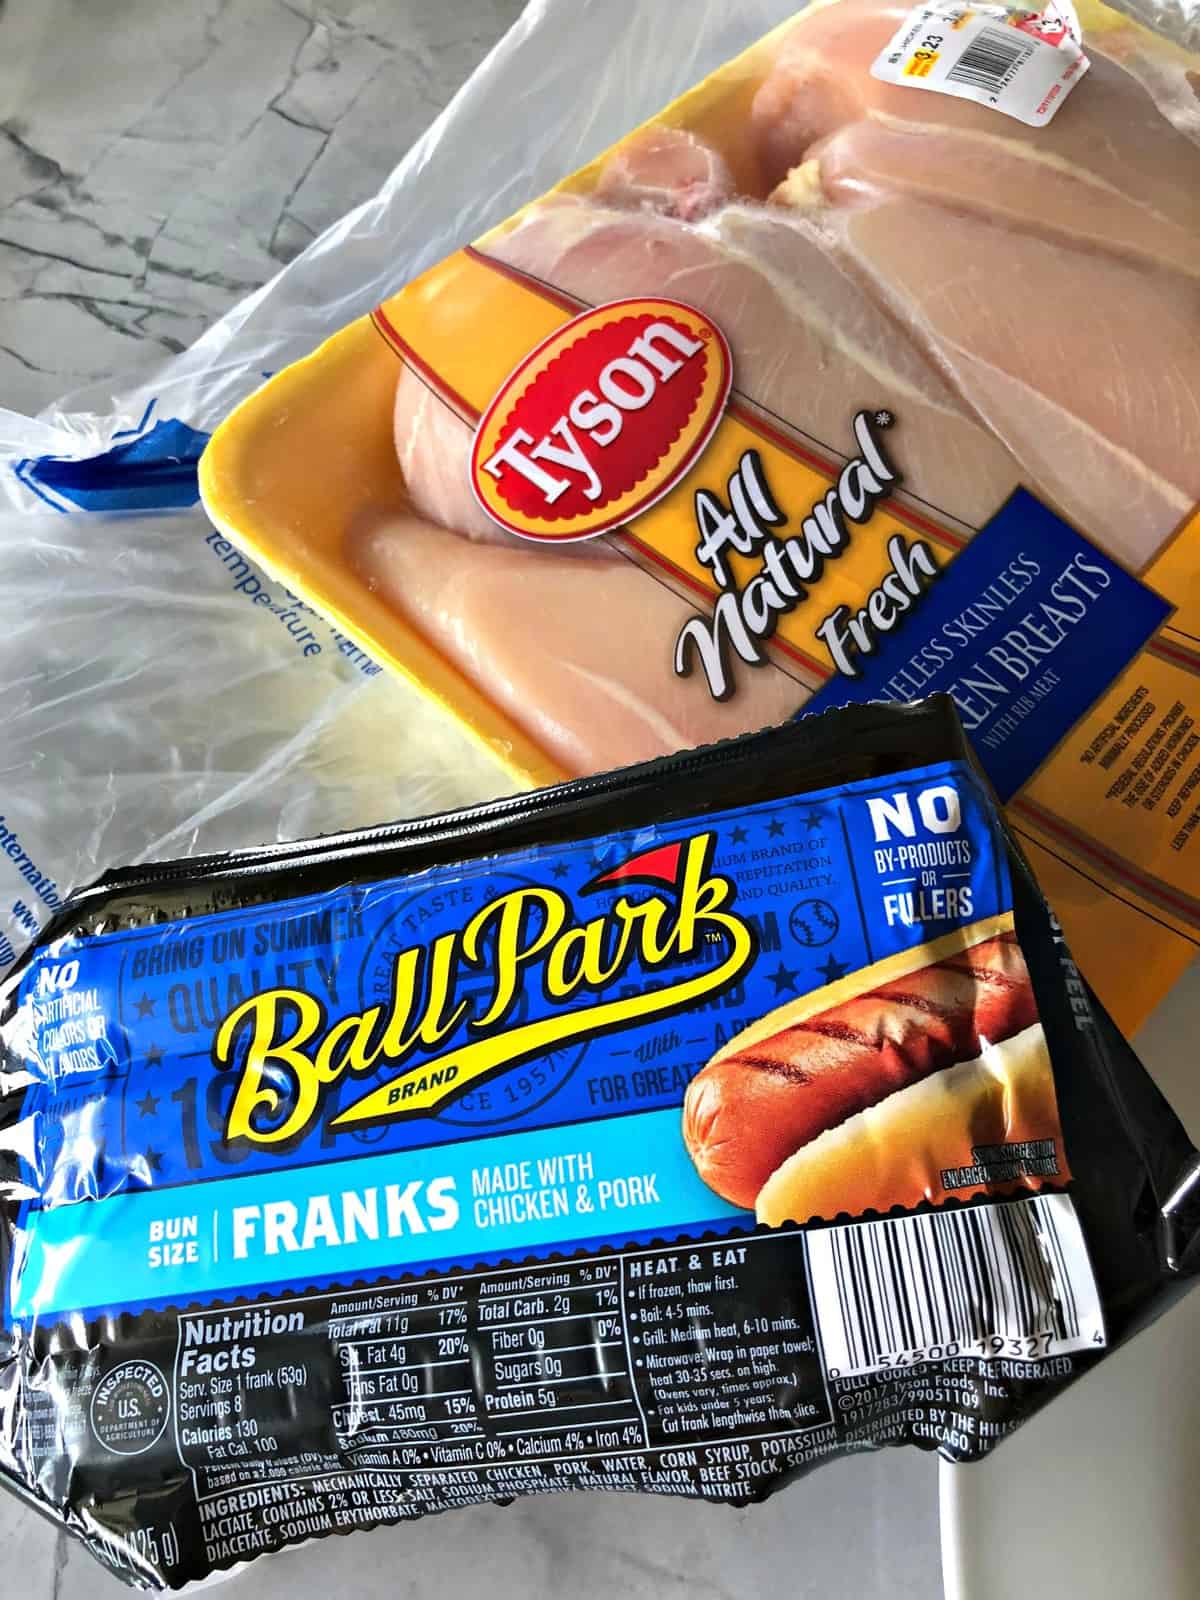 package of tyson all natural chicken breasts next to package of ballpark franks.